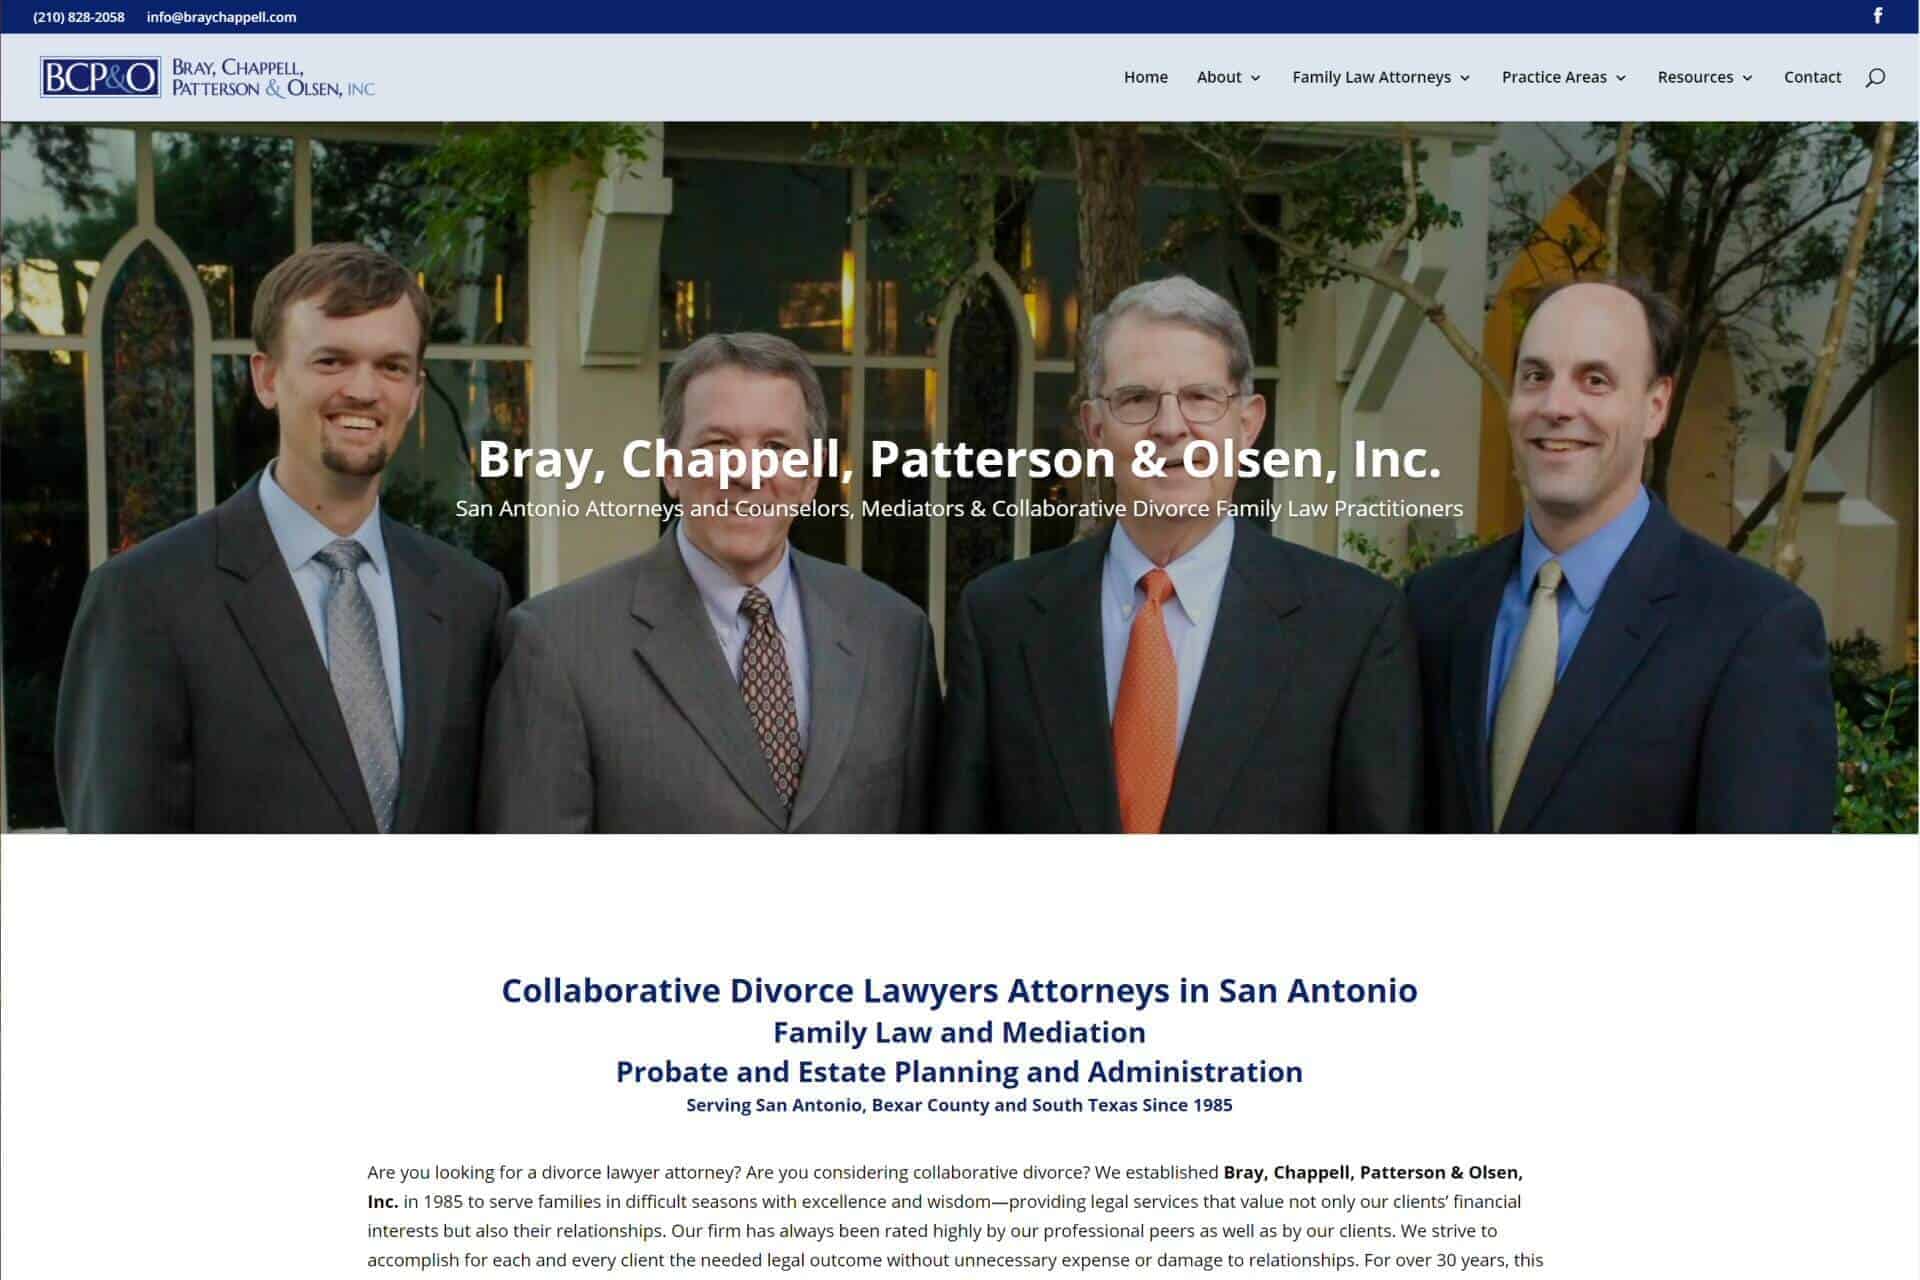 Bray, Chappell, Patterson & Olsen, Inc. by Rat Barricade